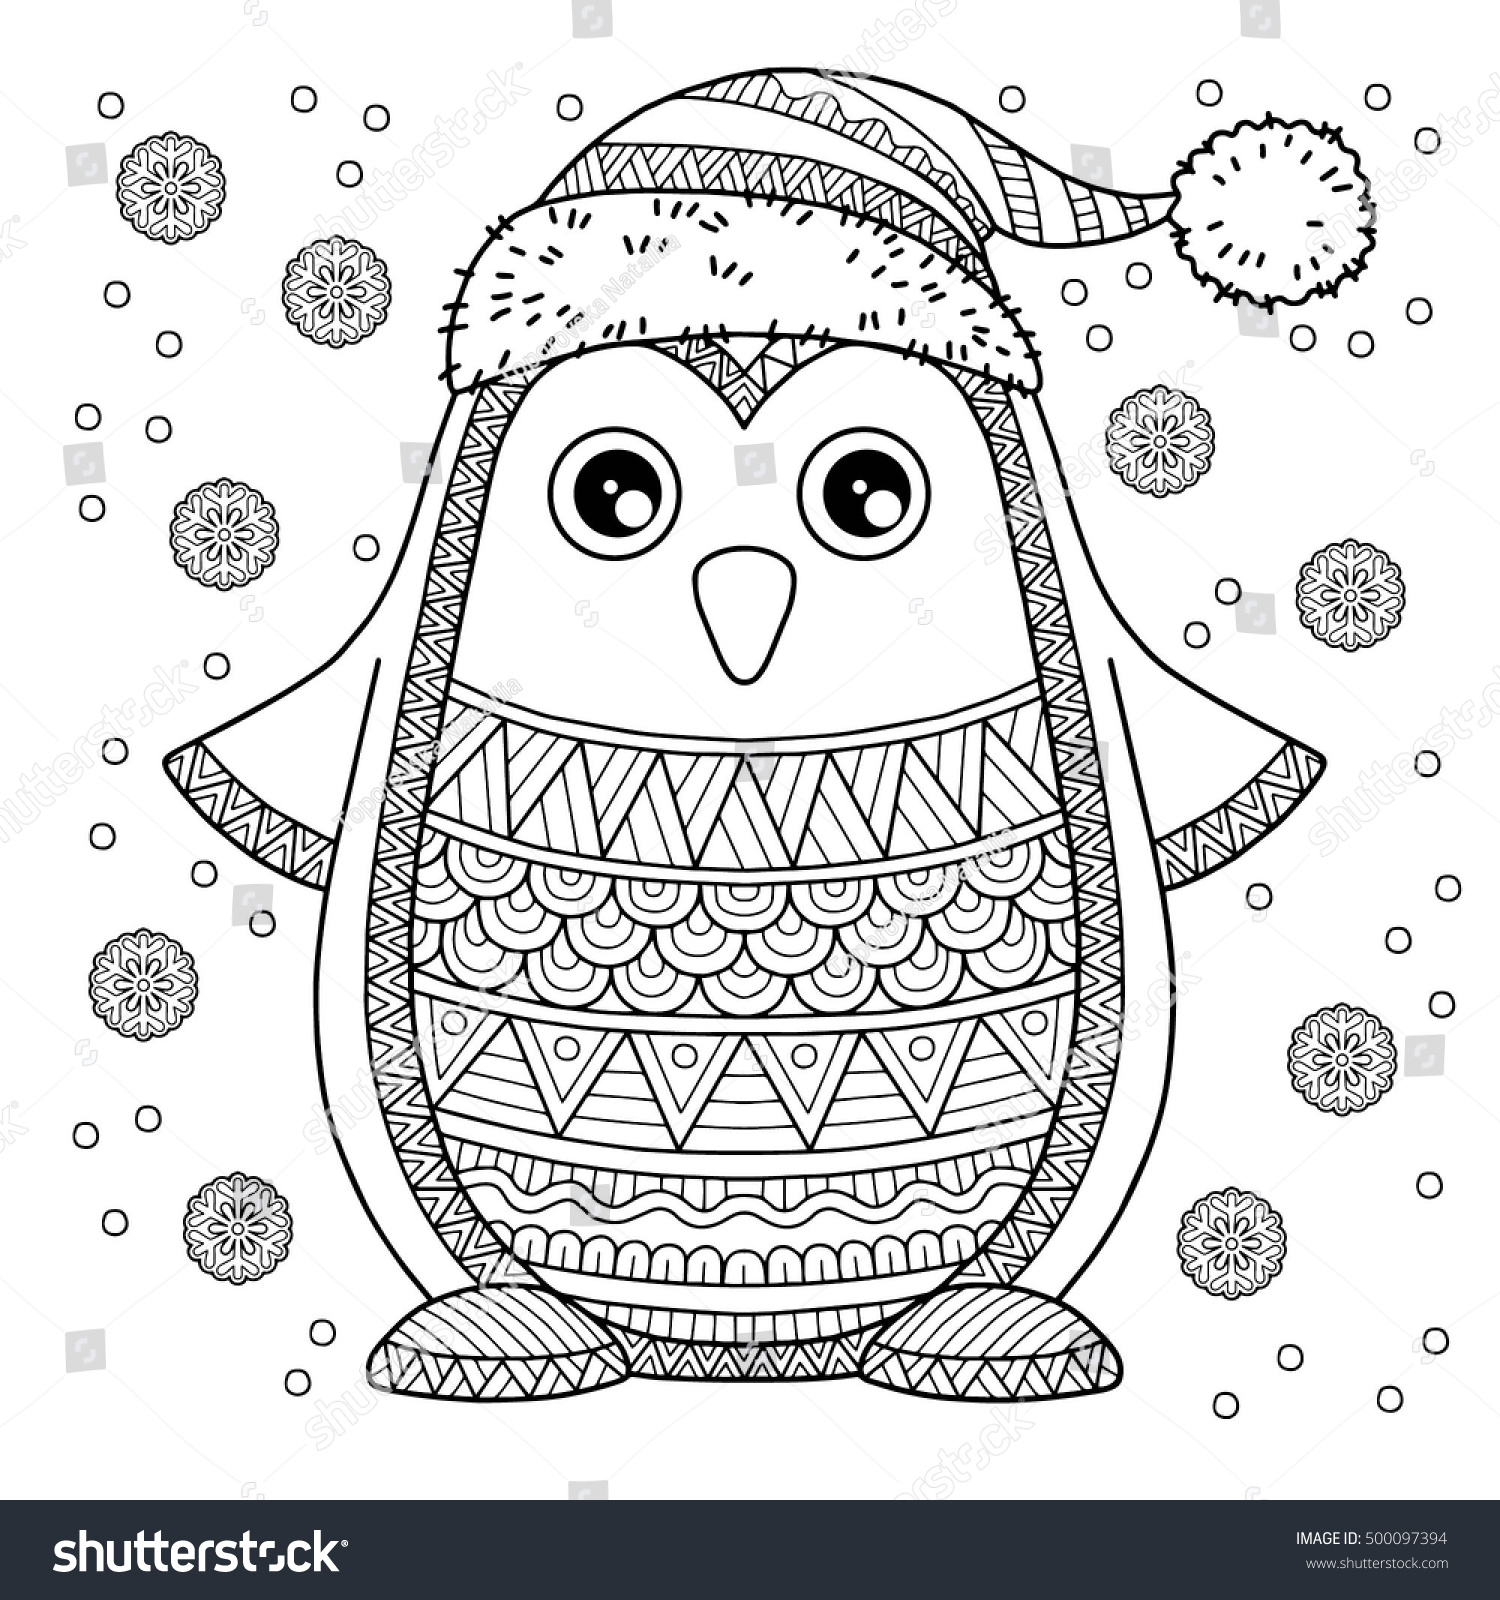 Merry Christmas Jolly Penguin The detailed coloring pages for adults Image for design